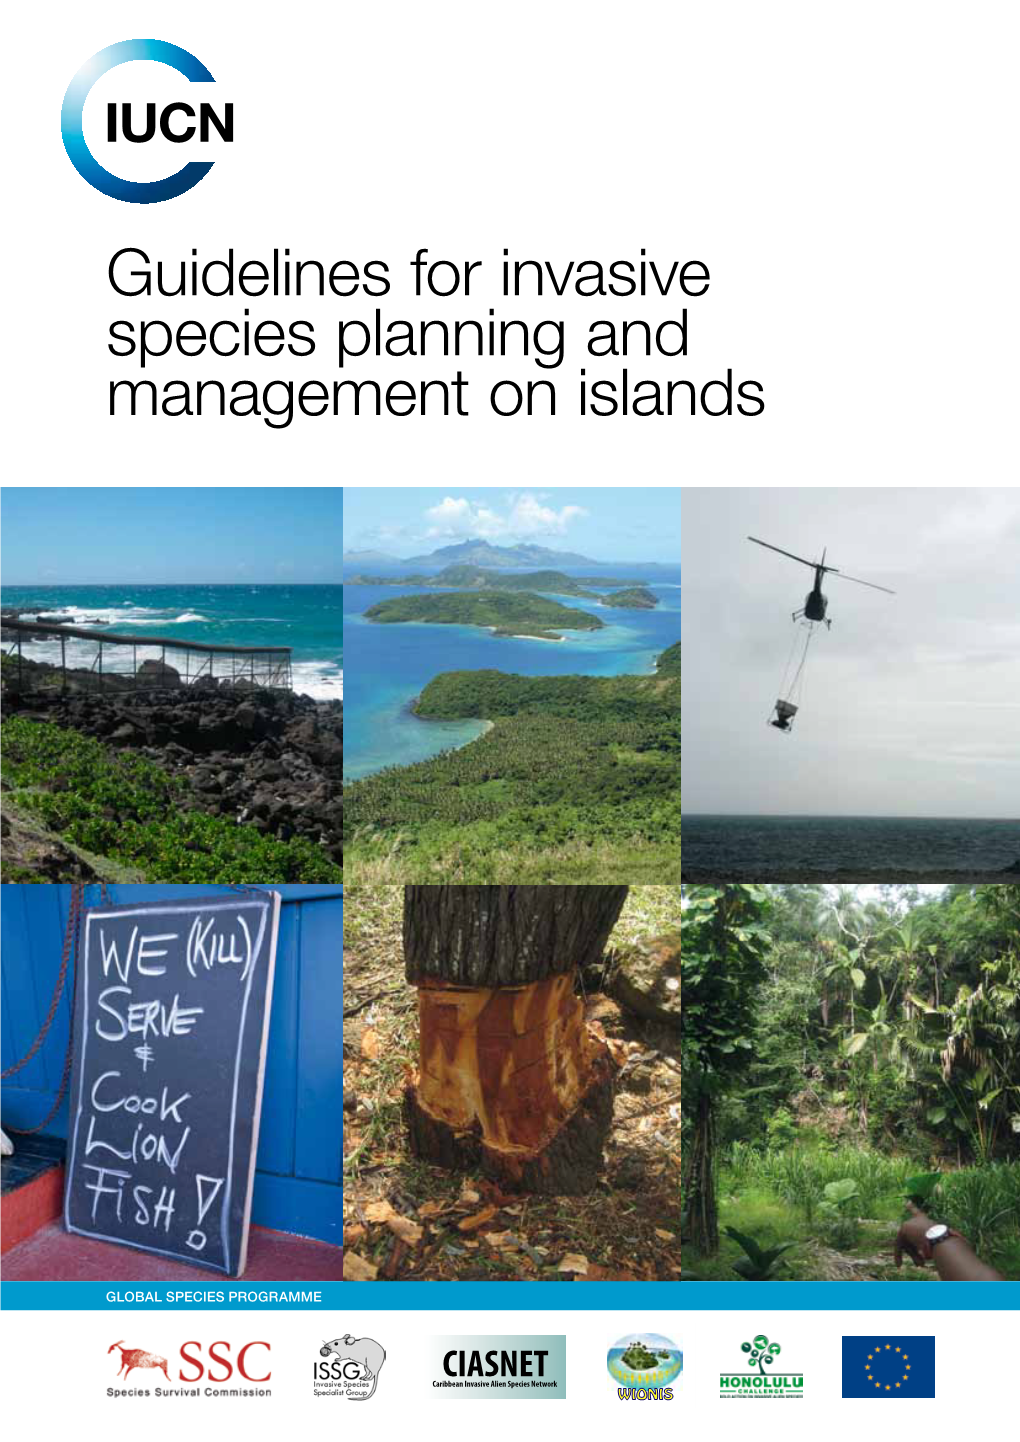 Guidelines for Invasive Species Planning and Management on Islands